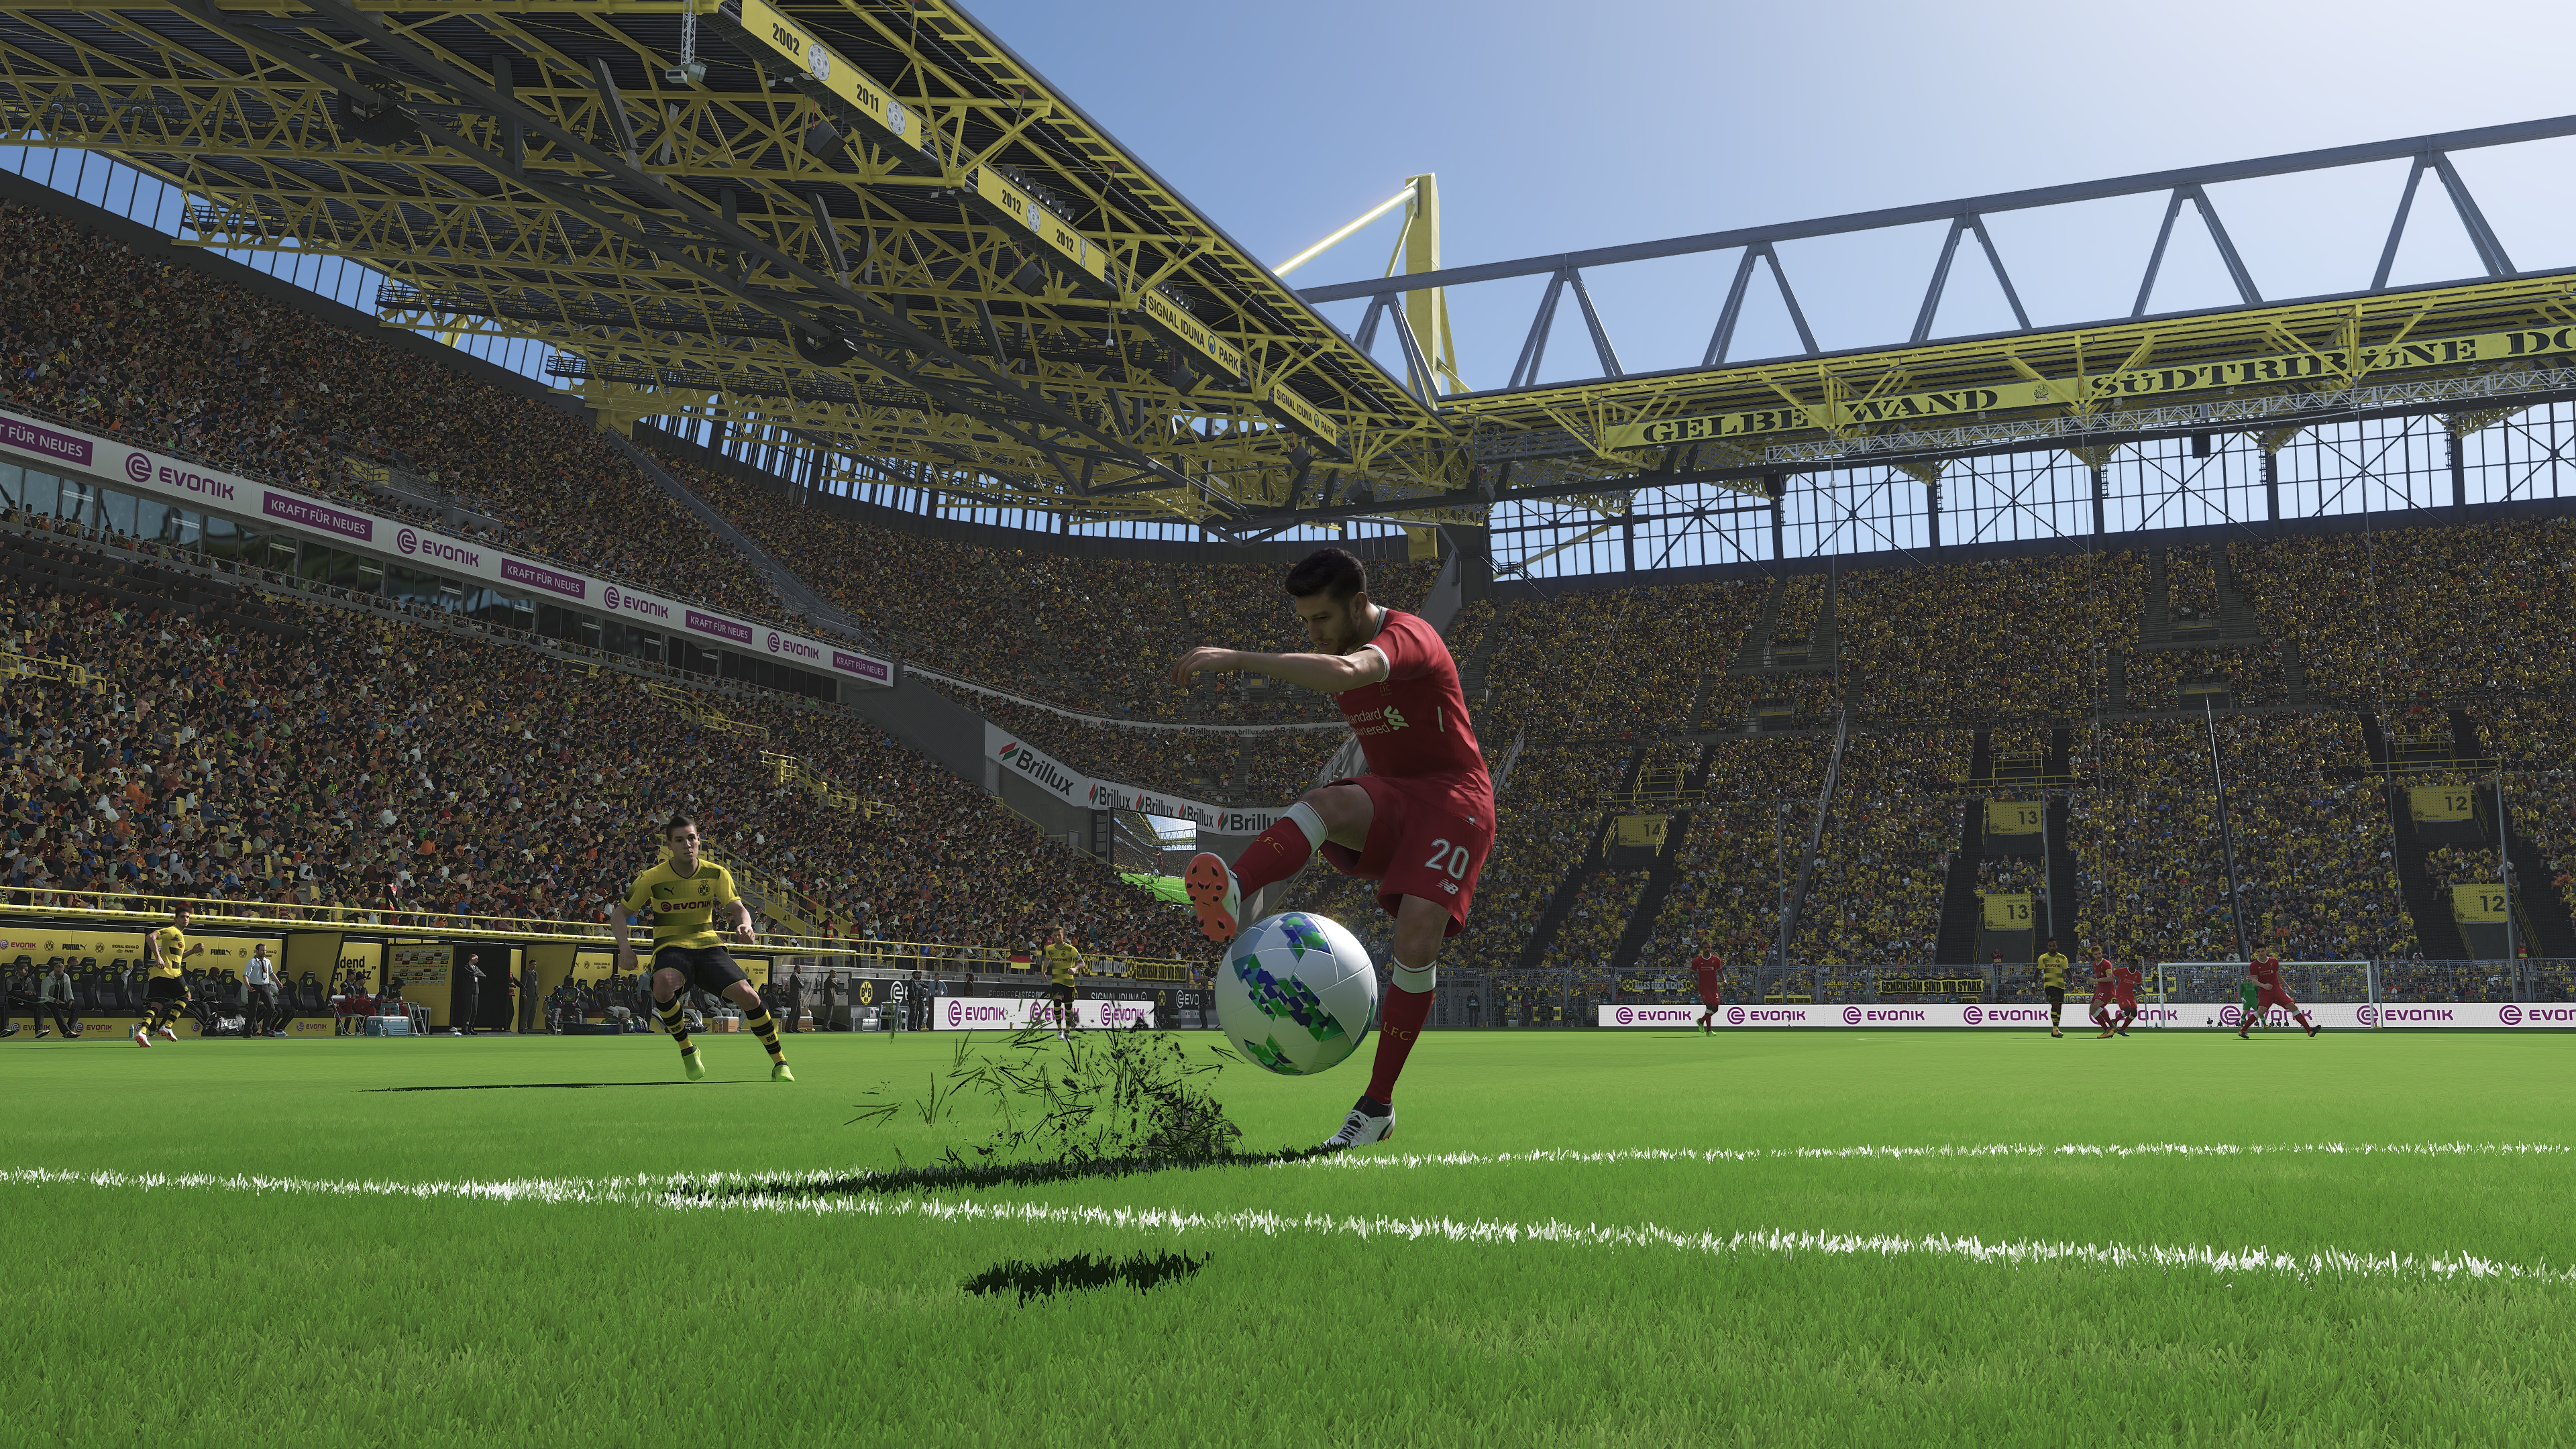 Pro Evolution Soccer 2018 Capture The Beautiful Game From Any Angle